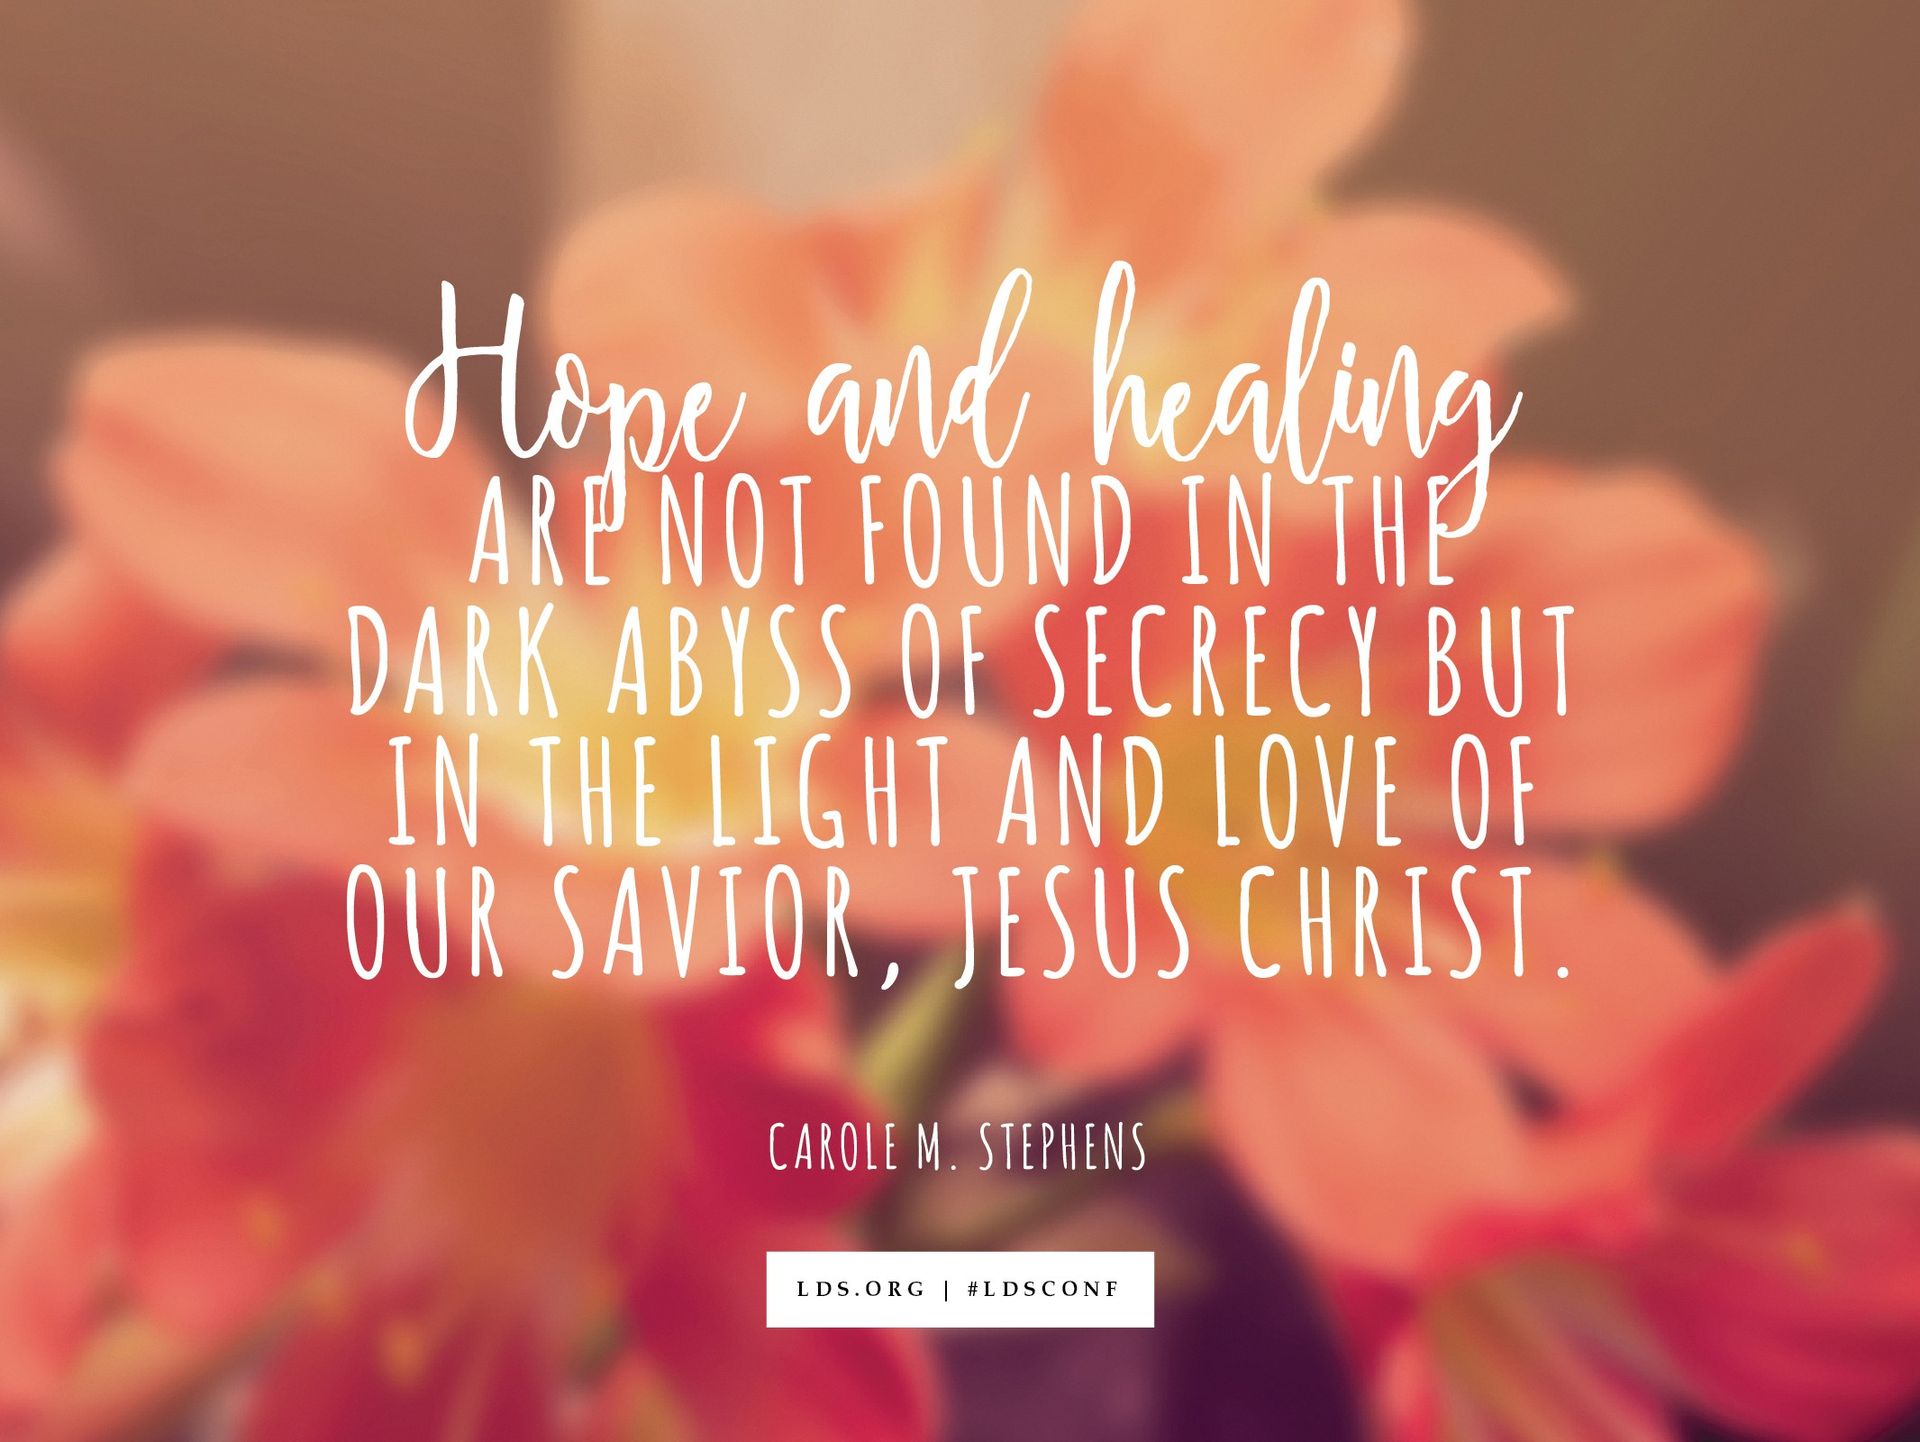 “Hope and healing are not found in the dark abyss of secrecy but in the light and love of our Savior, Jesus Christ.”—Carole M. Stephens, “The Master Healer”